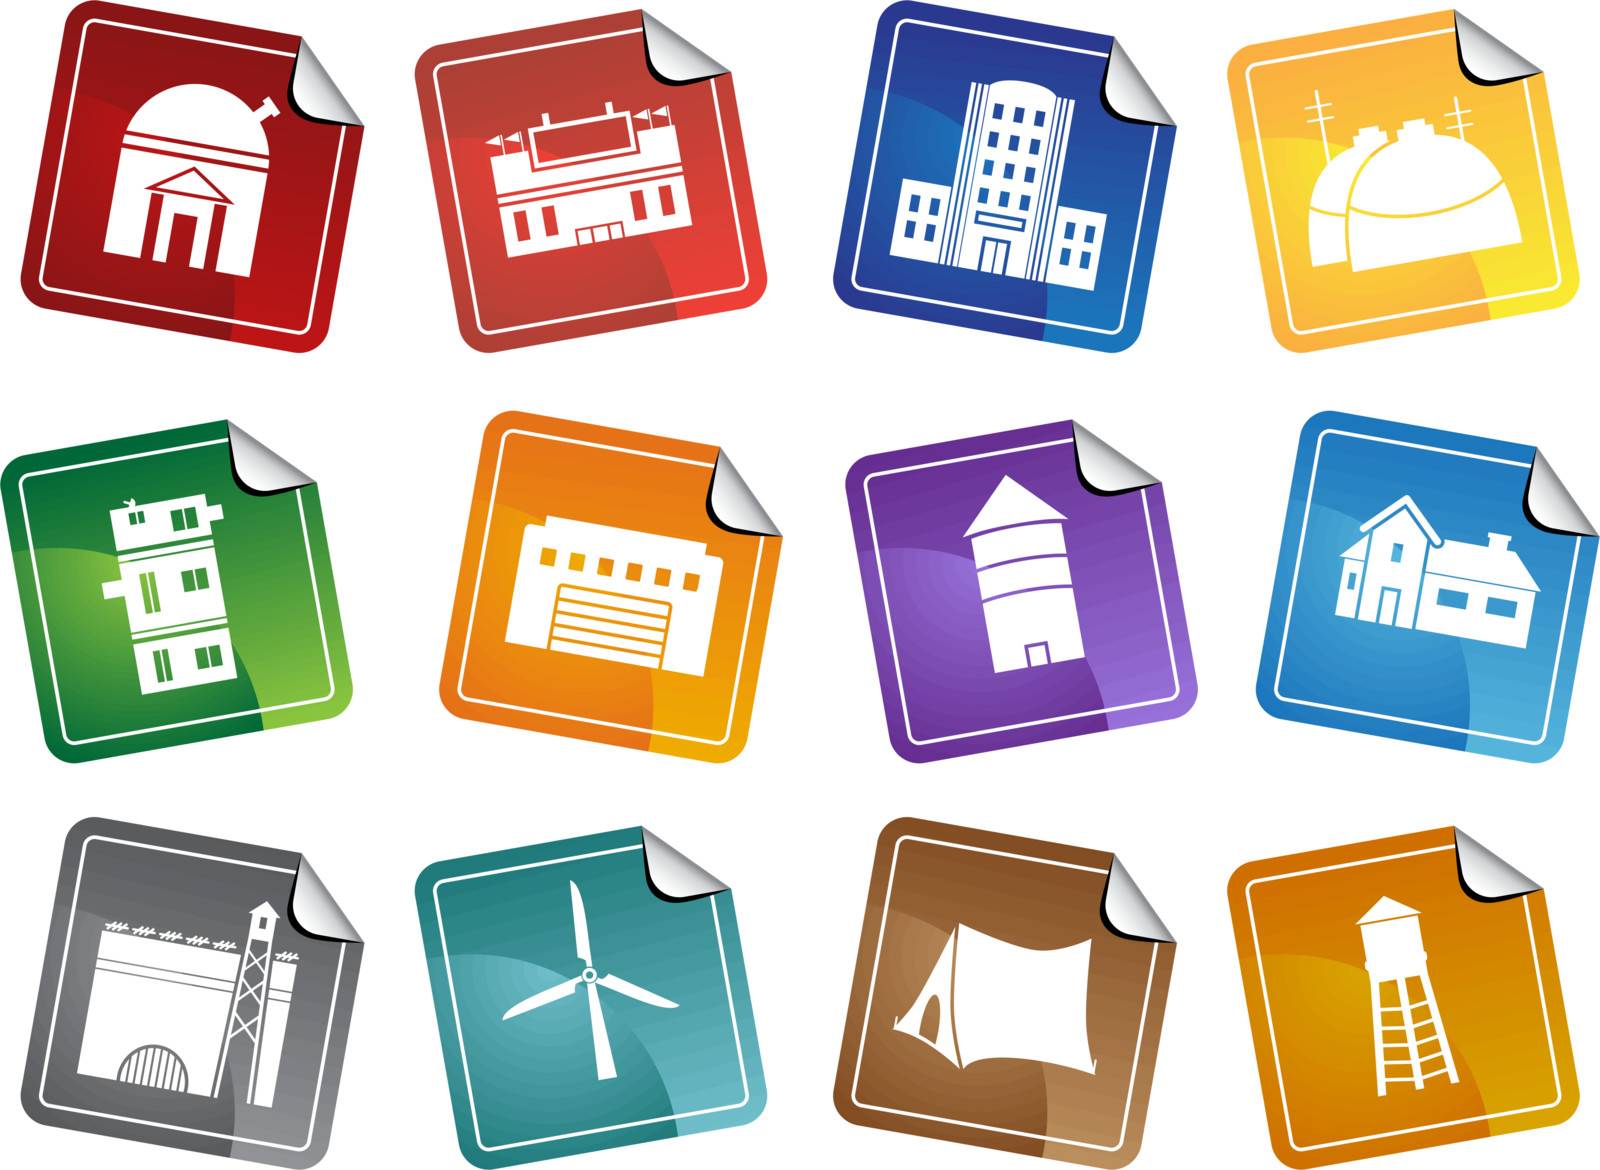 Set of 12 building structures - sticker style.